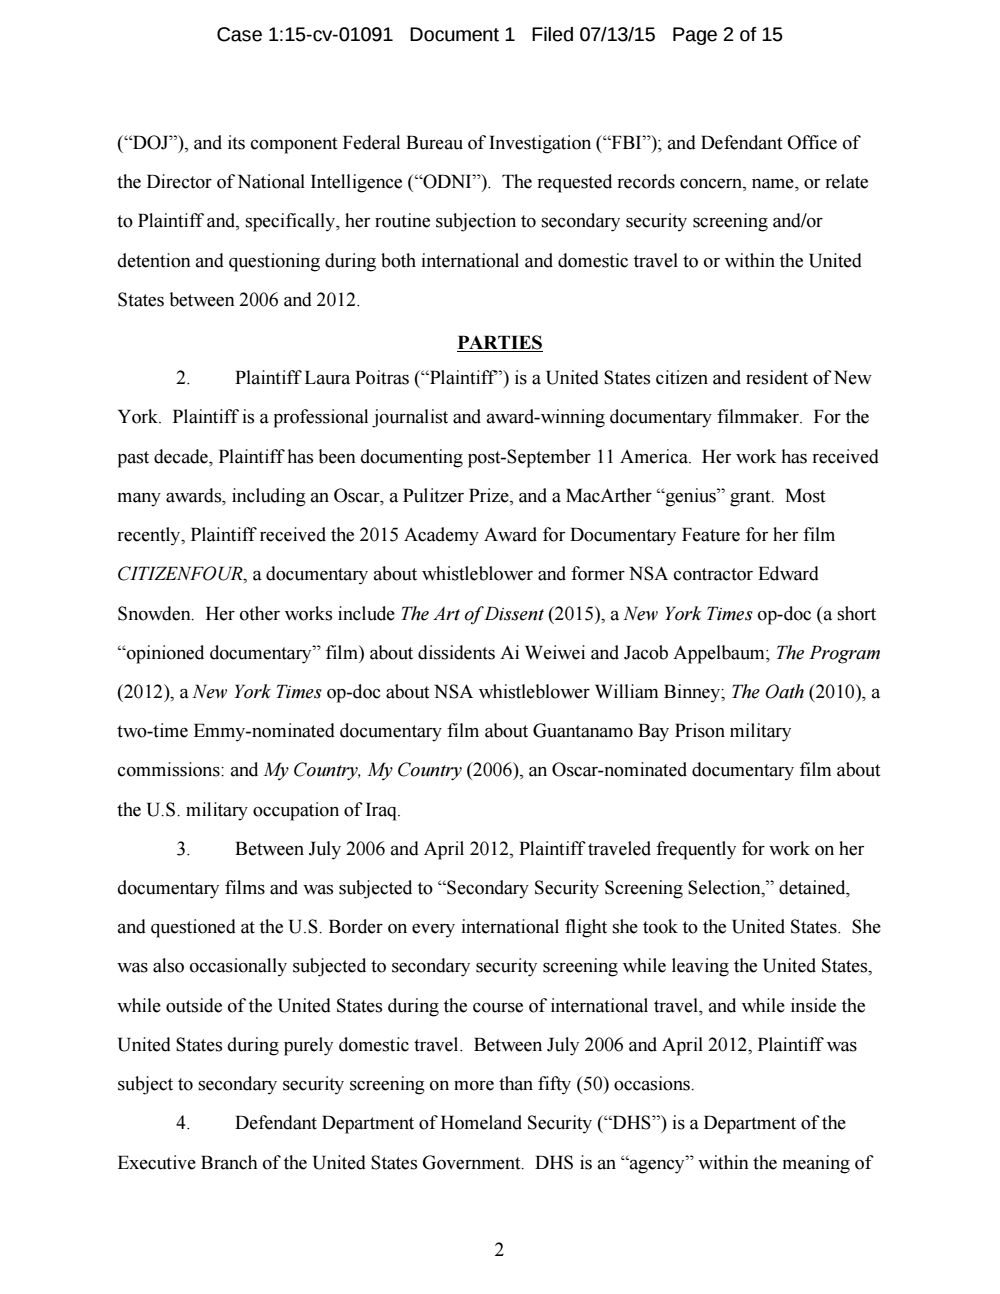 Page 2 from Laura Poitras FOIA Lawsuit